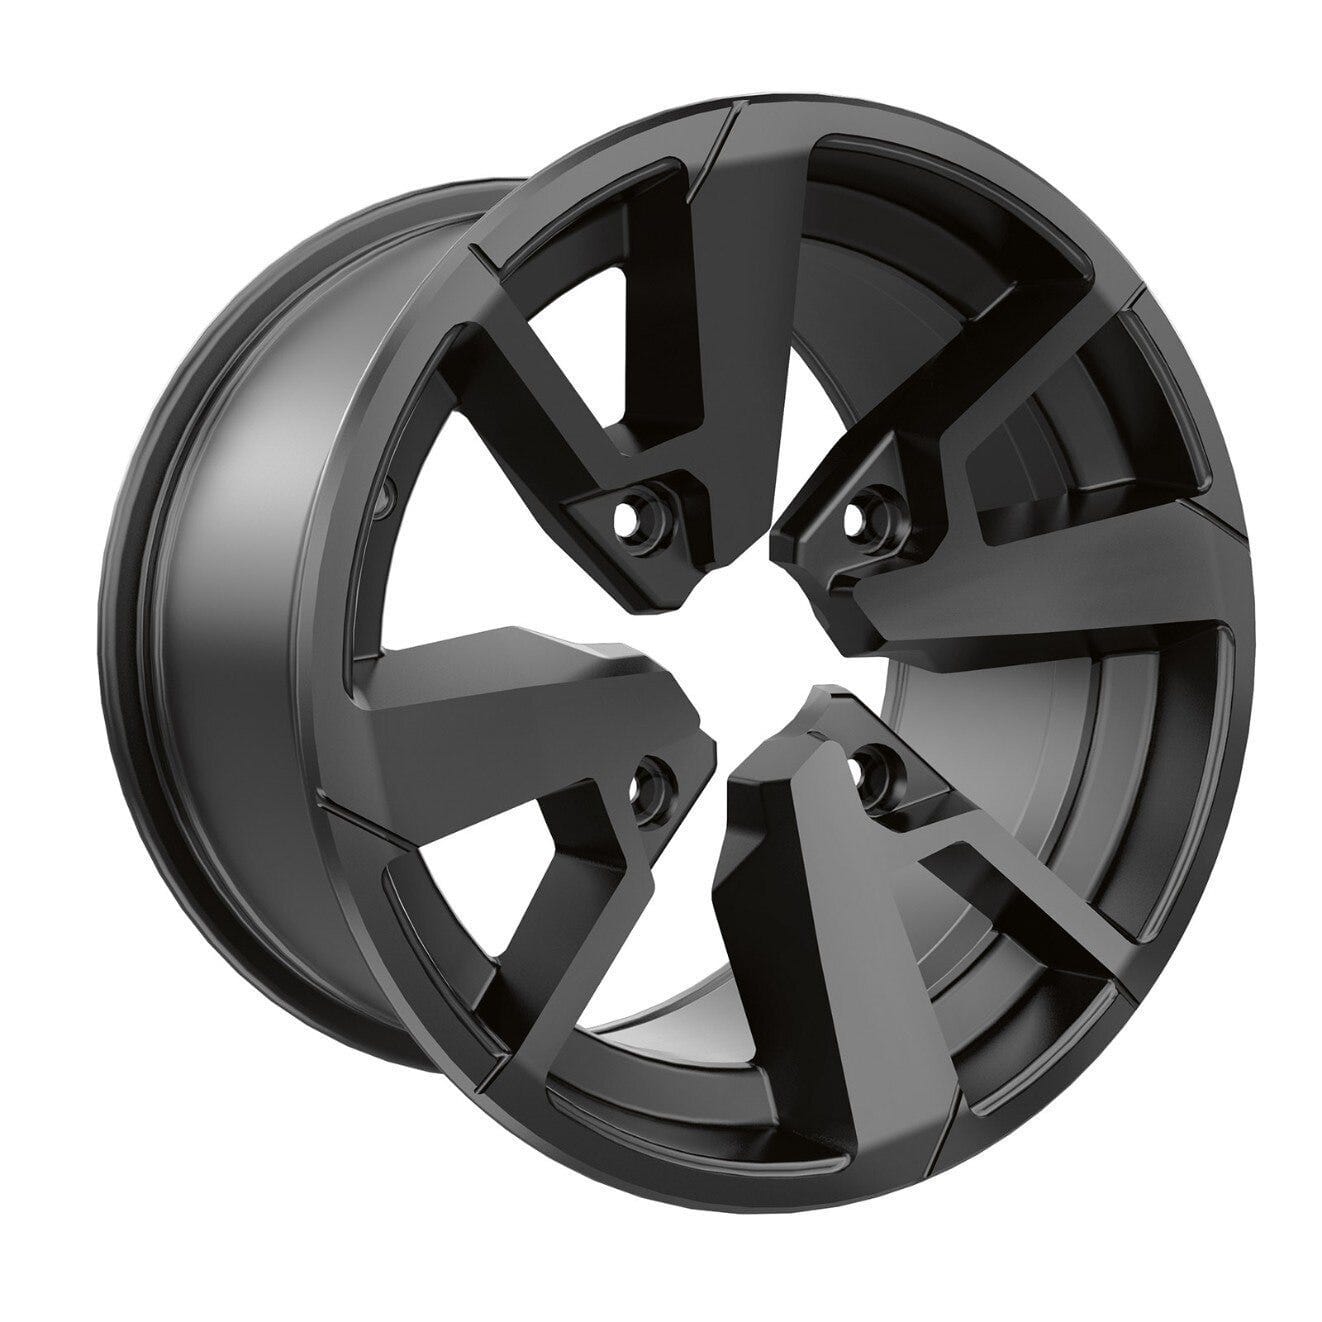 14 in. Rim - Rear / Black with clear coat